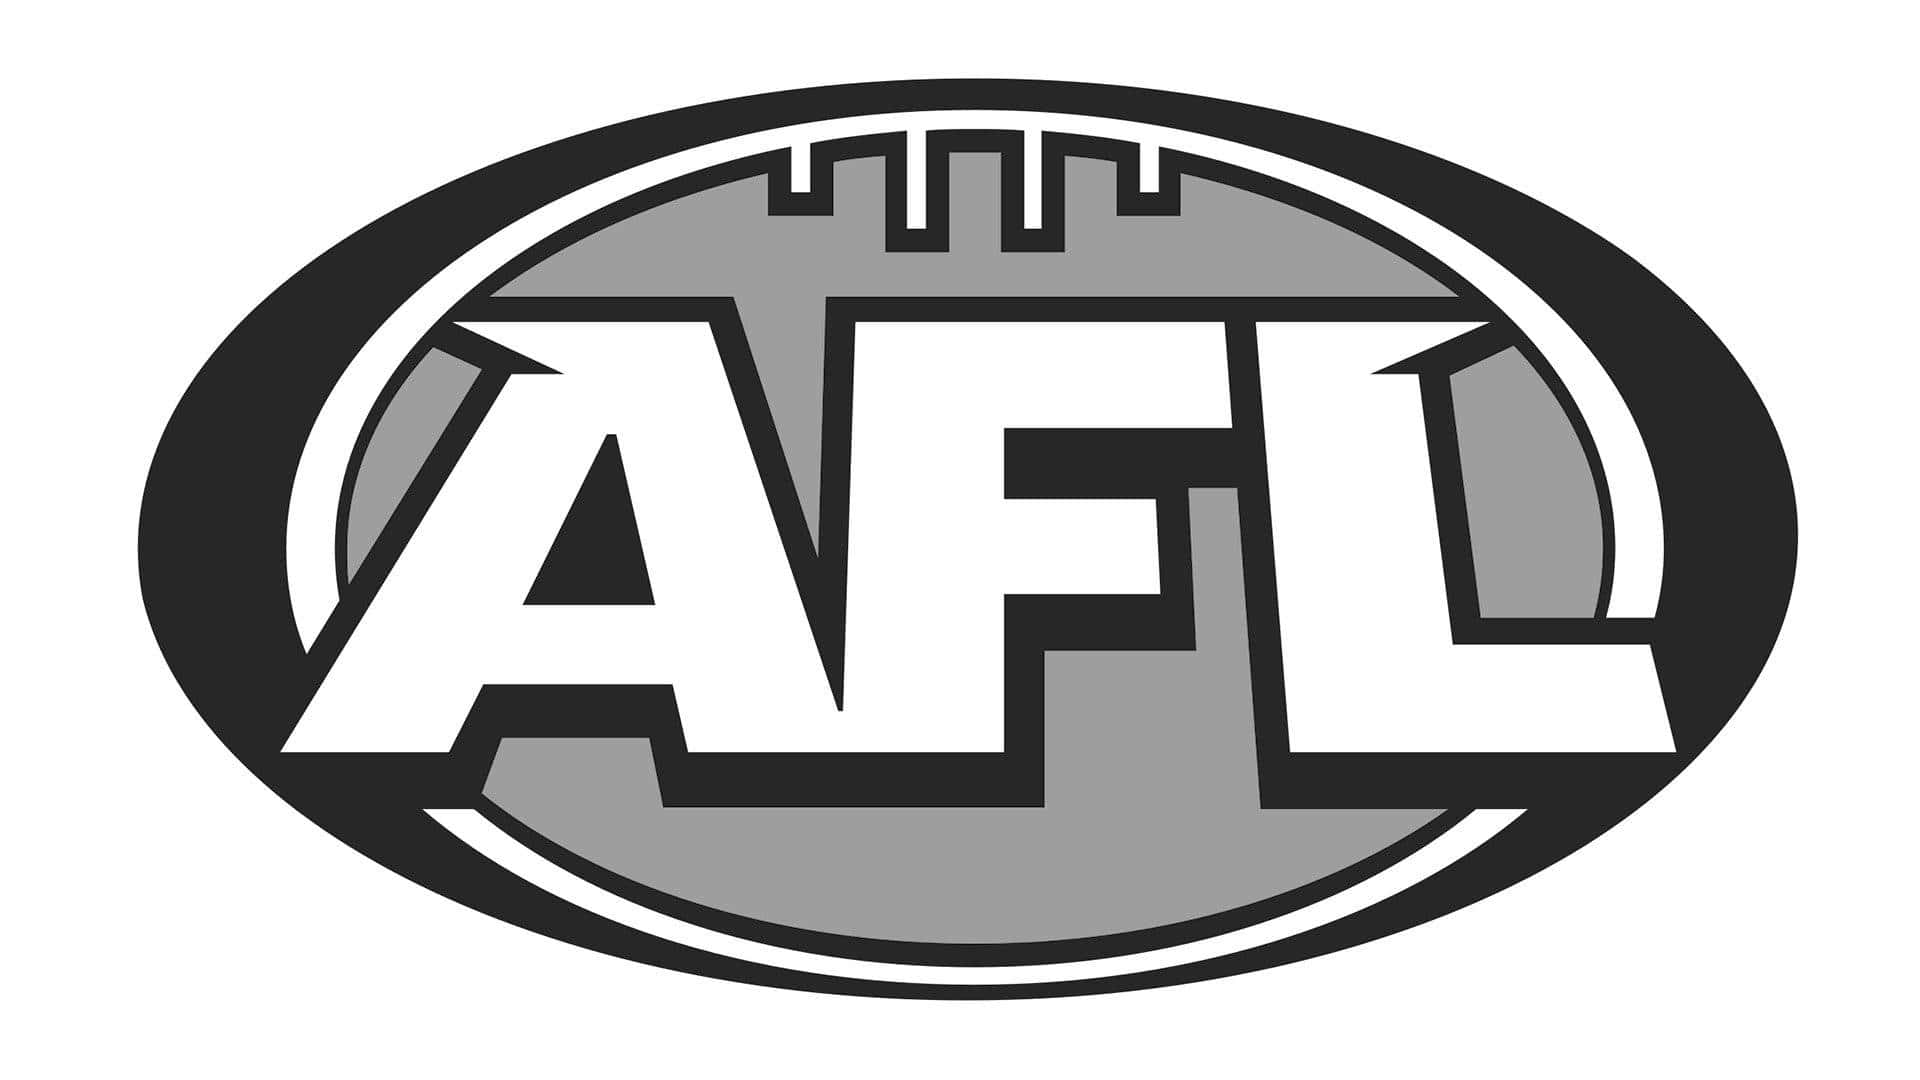 Download Afl Logo With A Black And White Circle